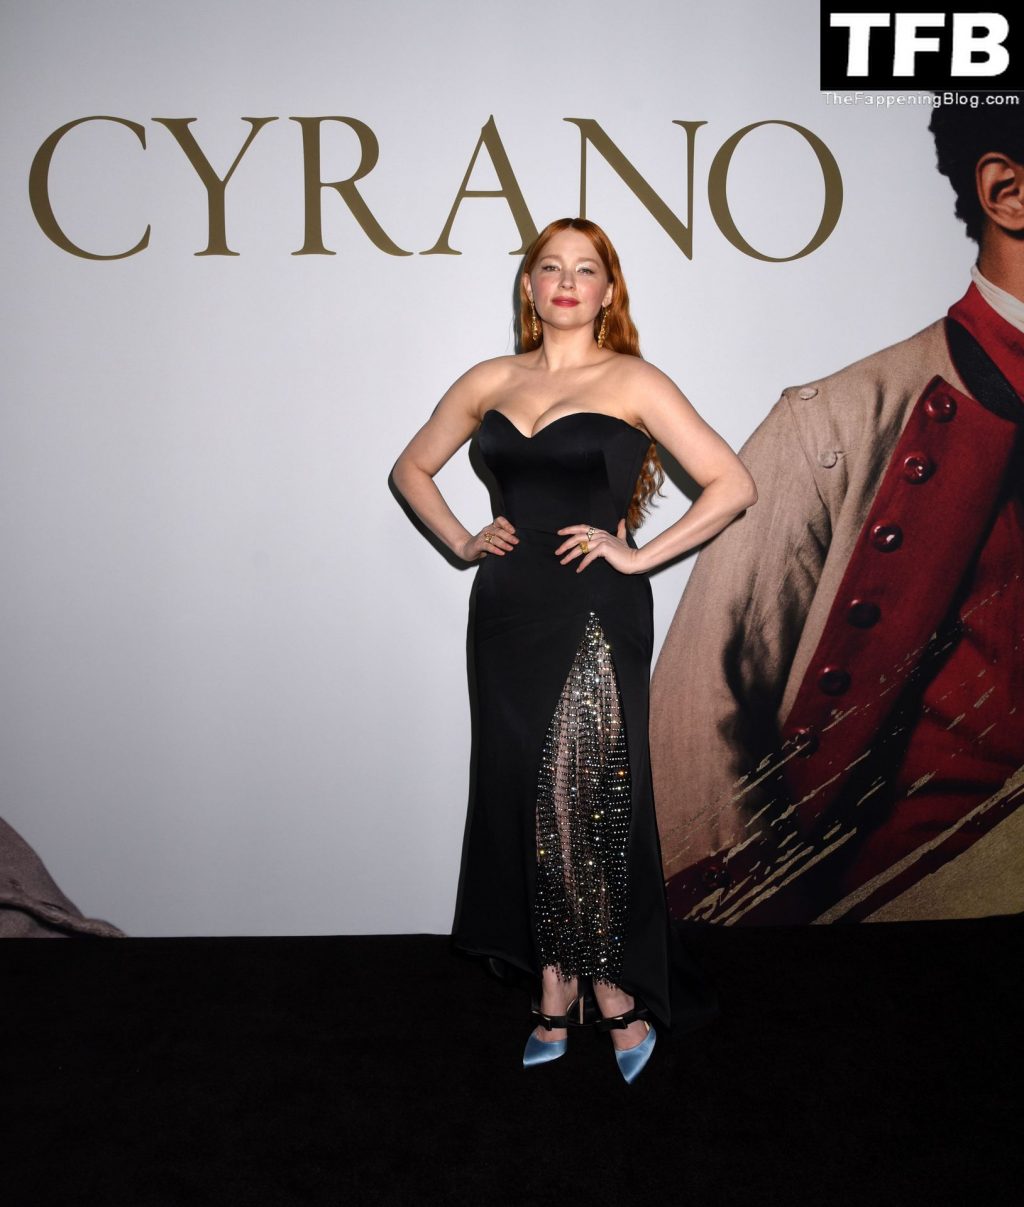 Haley Bennett Sexy The Fappening Blog 22 1024x1207 - Haley Bennett Shows Off Her Sexy Boobs at the Premiere of “Cyrano” in NYC (43 Photos)